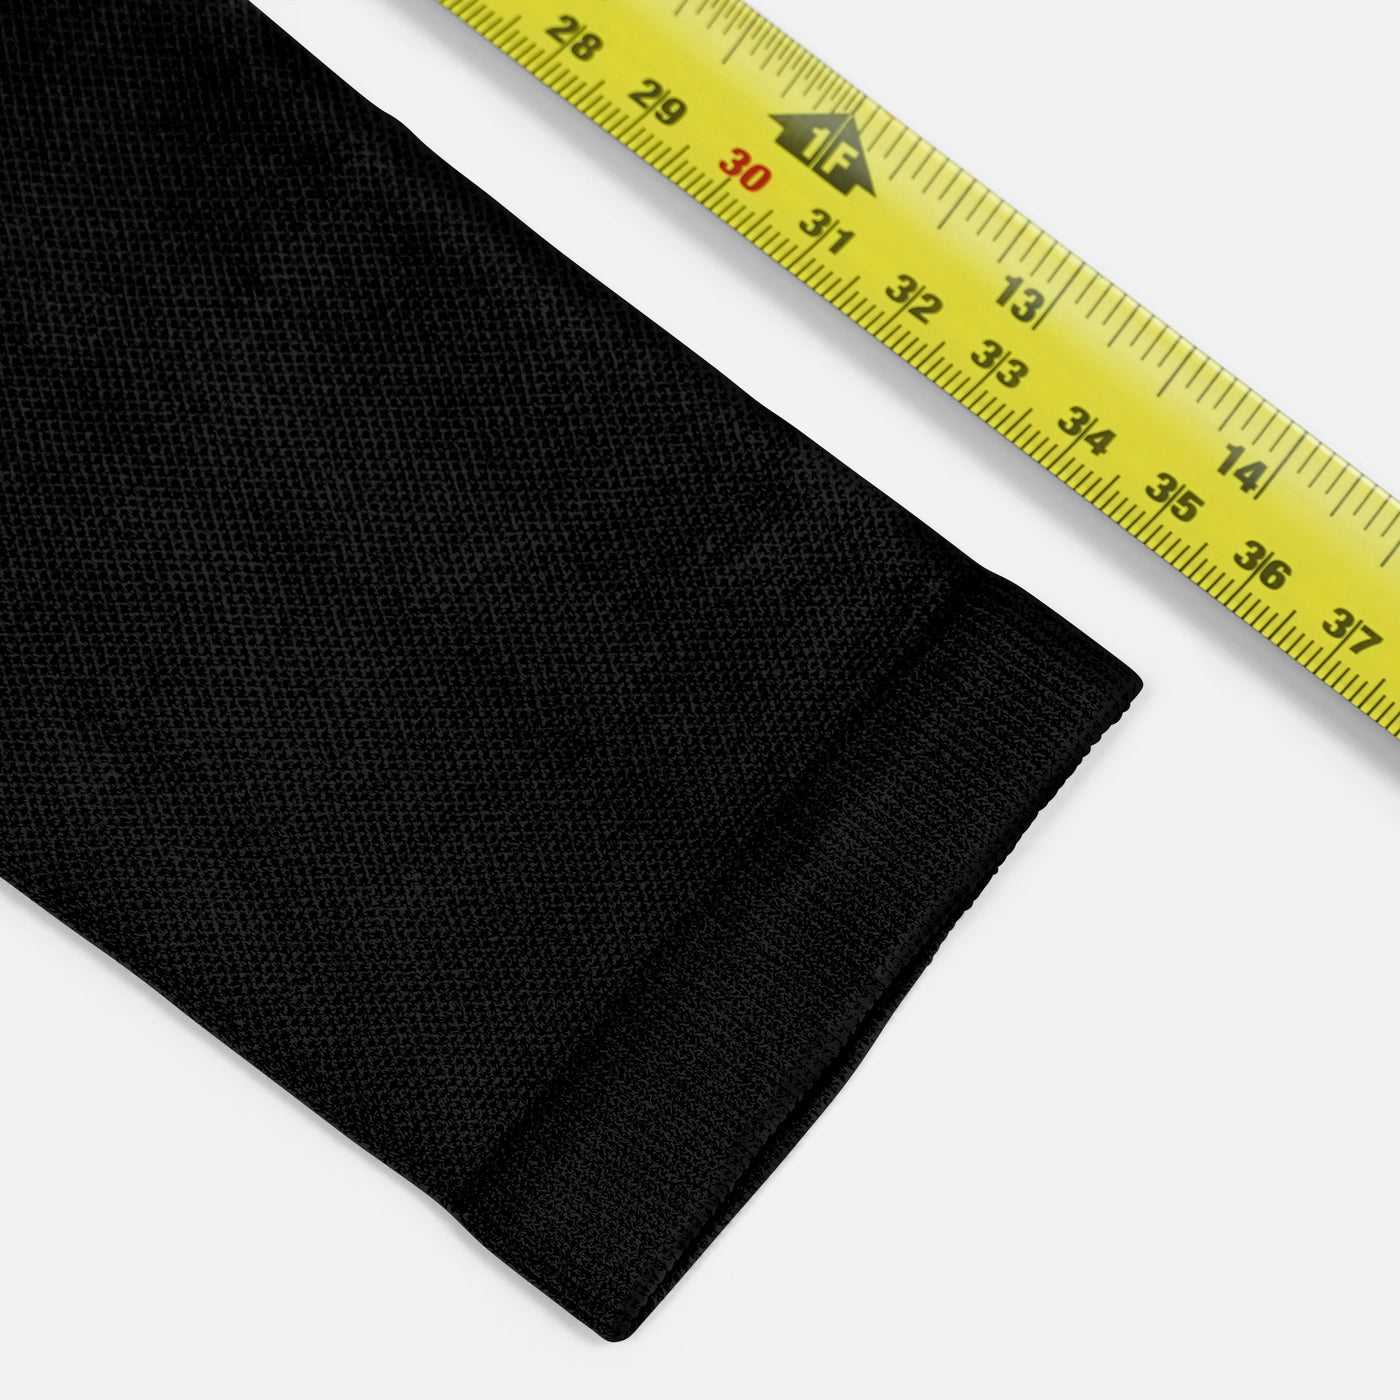 Basic Black One Size Fits All Arm Sleeve